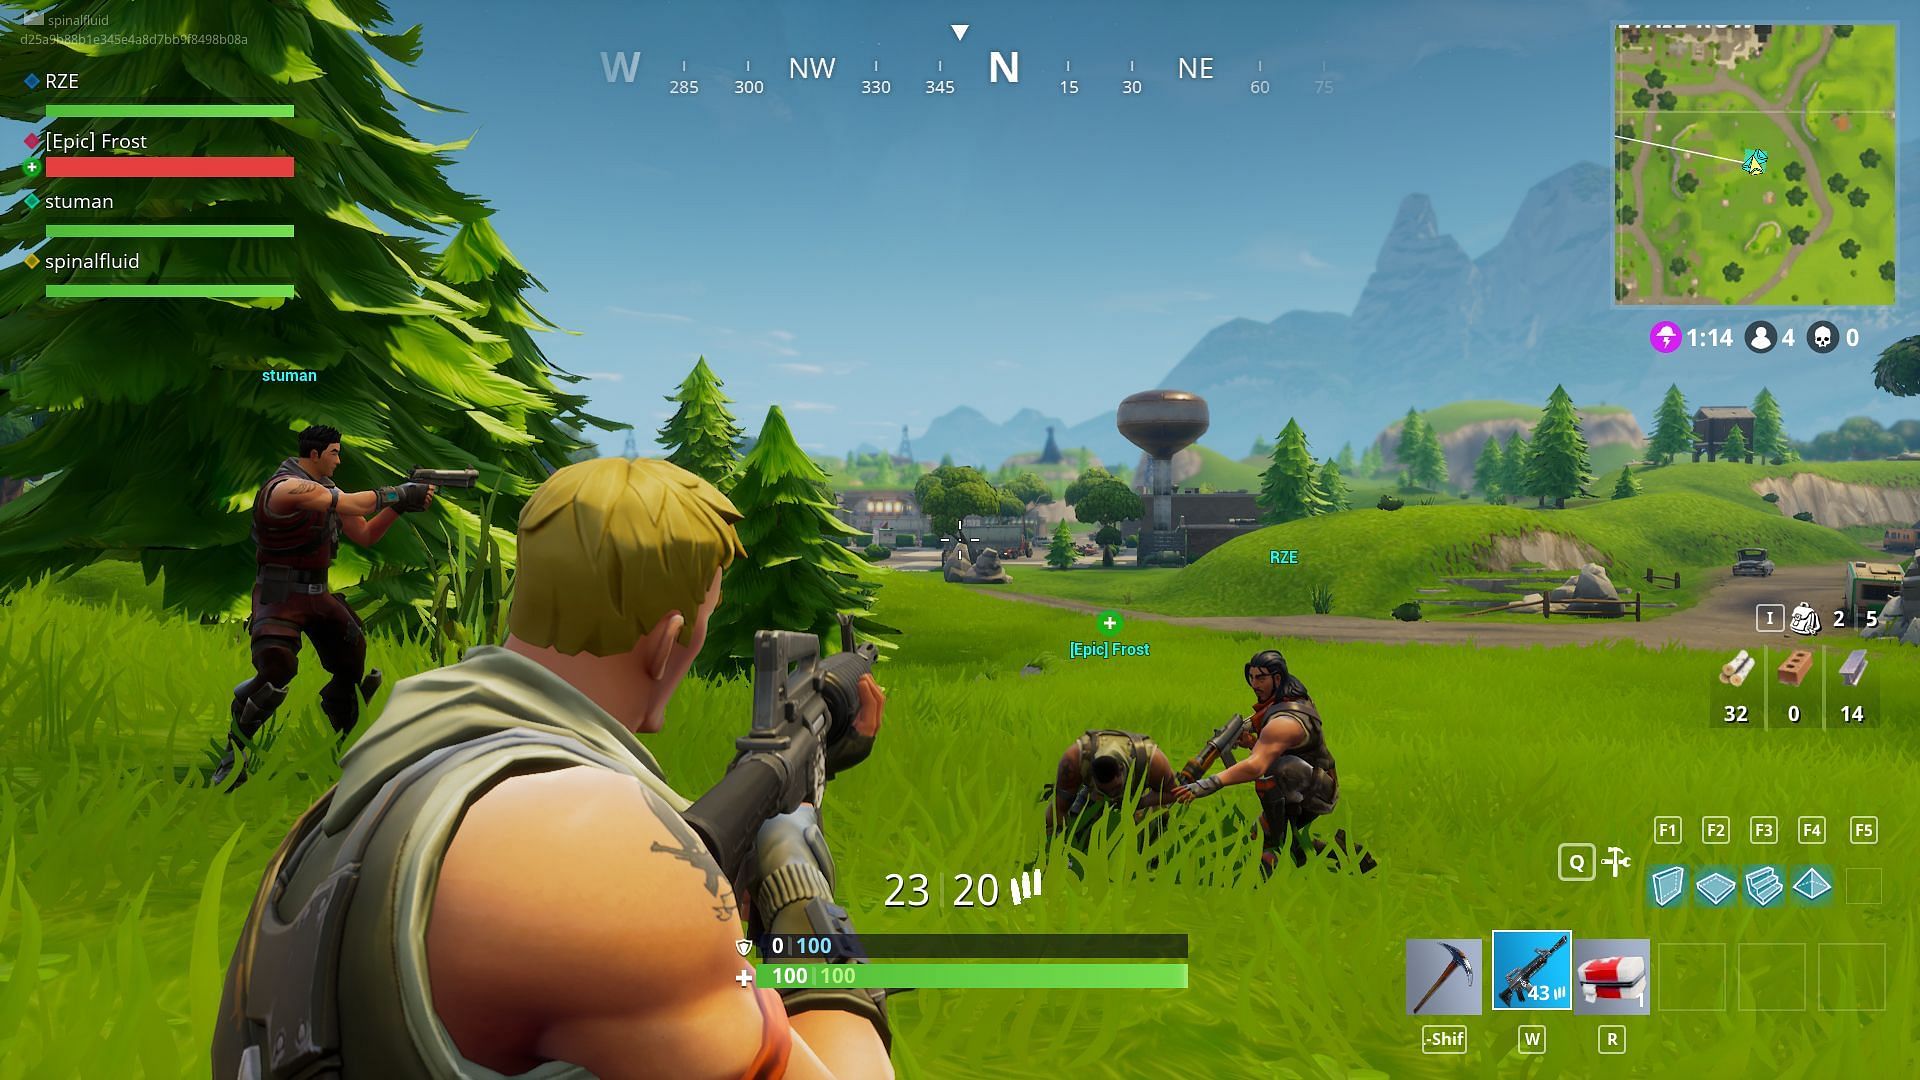 Plenty of things can occur in a match for Fortnite players, from lucky loot to being third partied (Image via Epic Games)